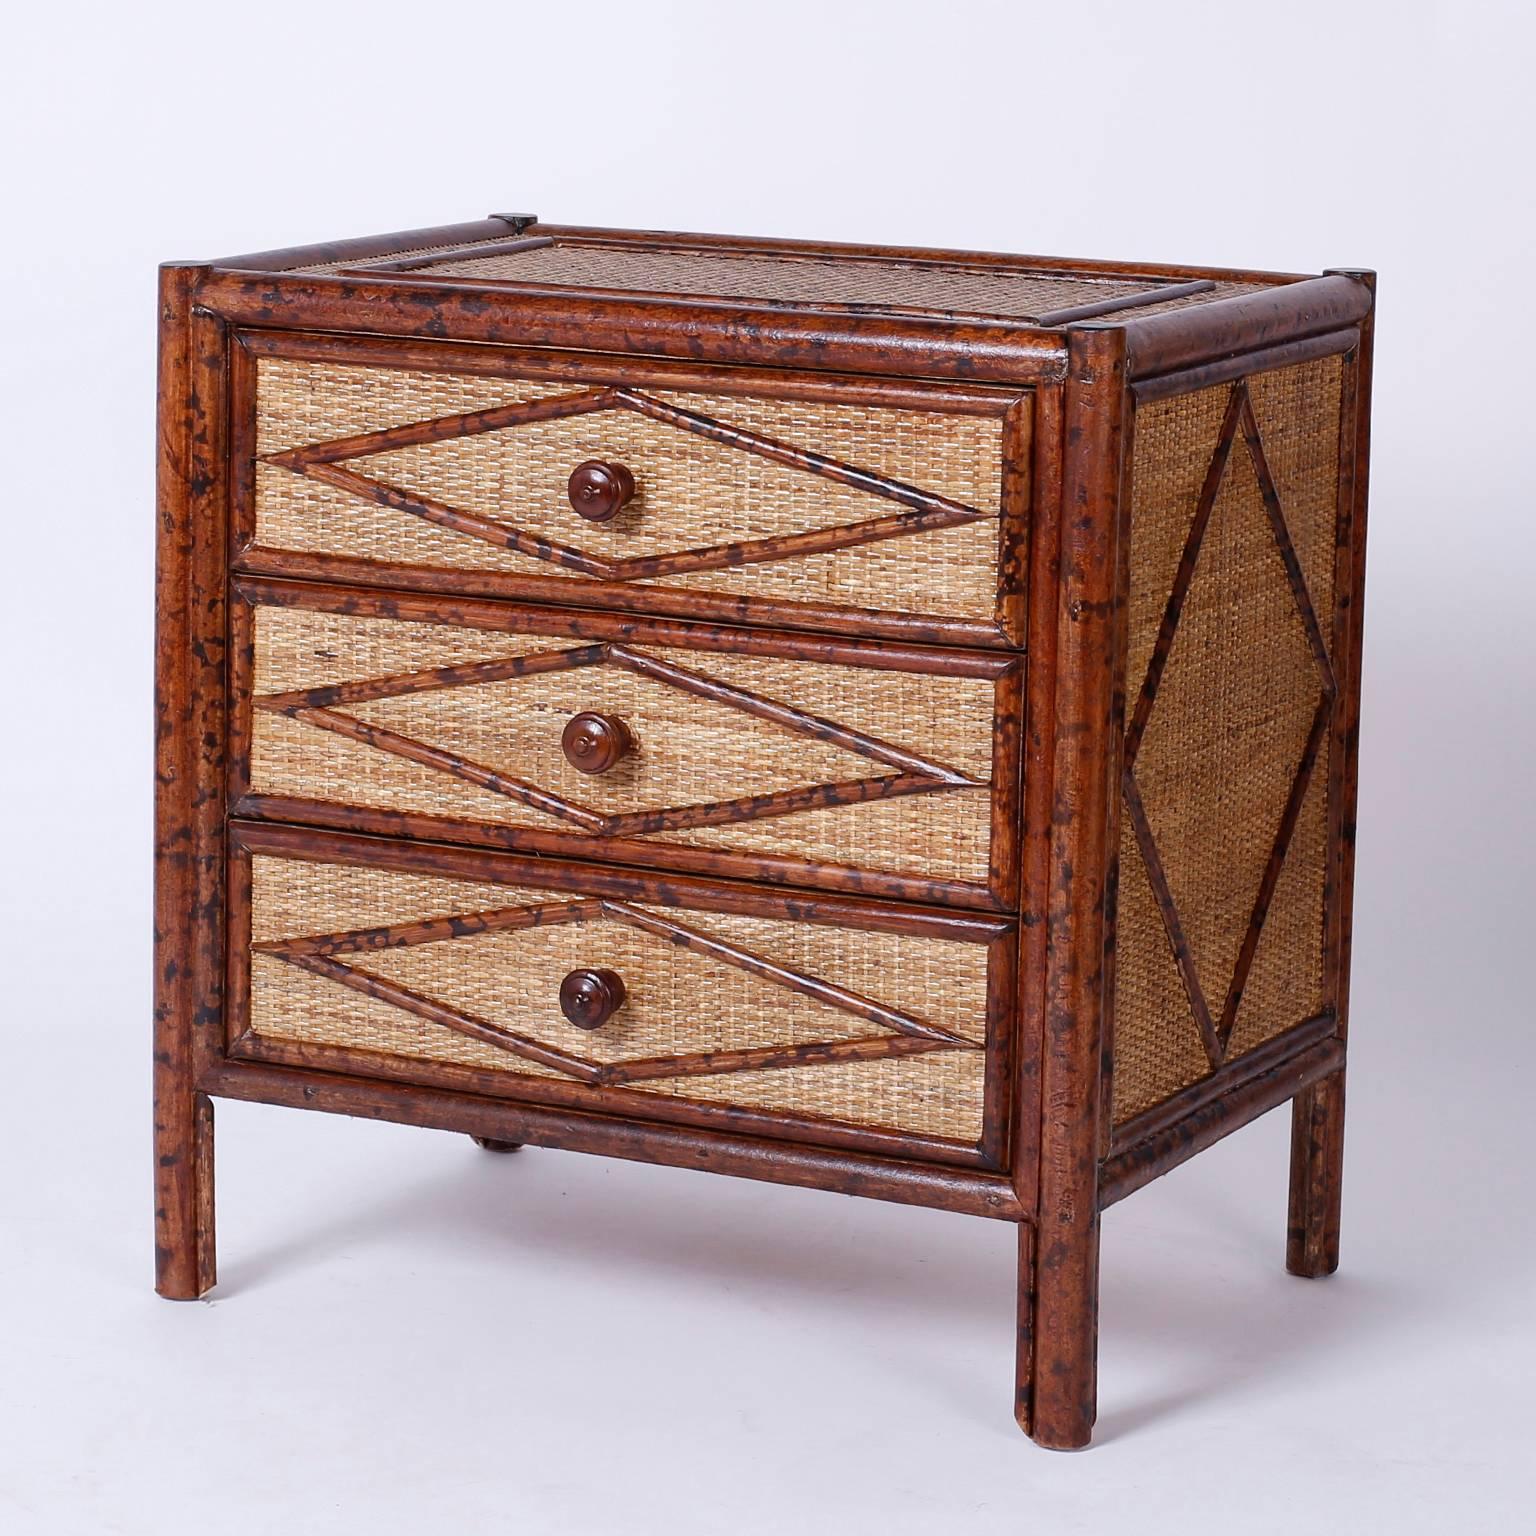 British Colonial Pair of Midcentury Faux Bamboo Nightstands or Chests